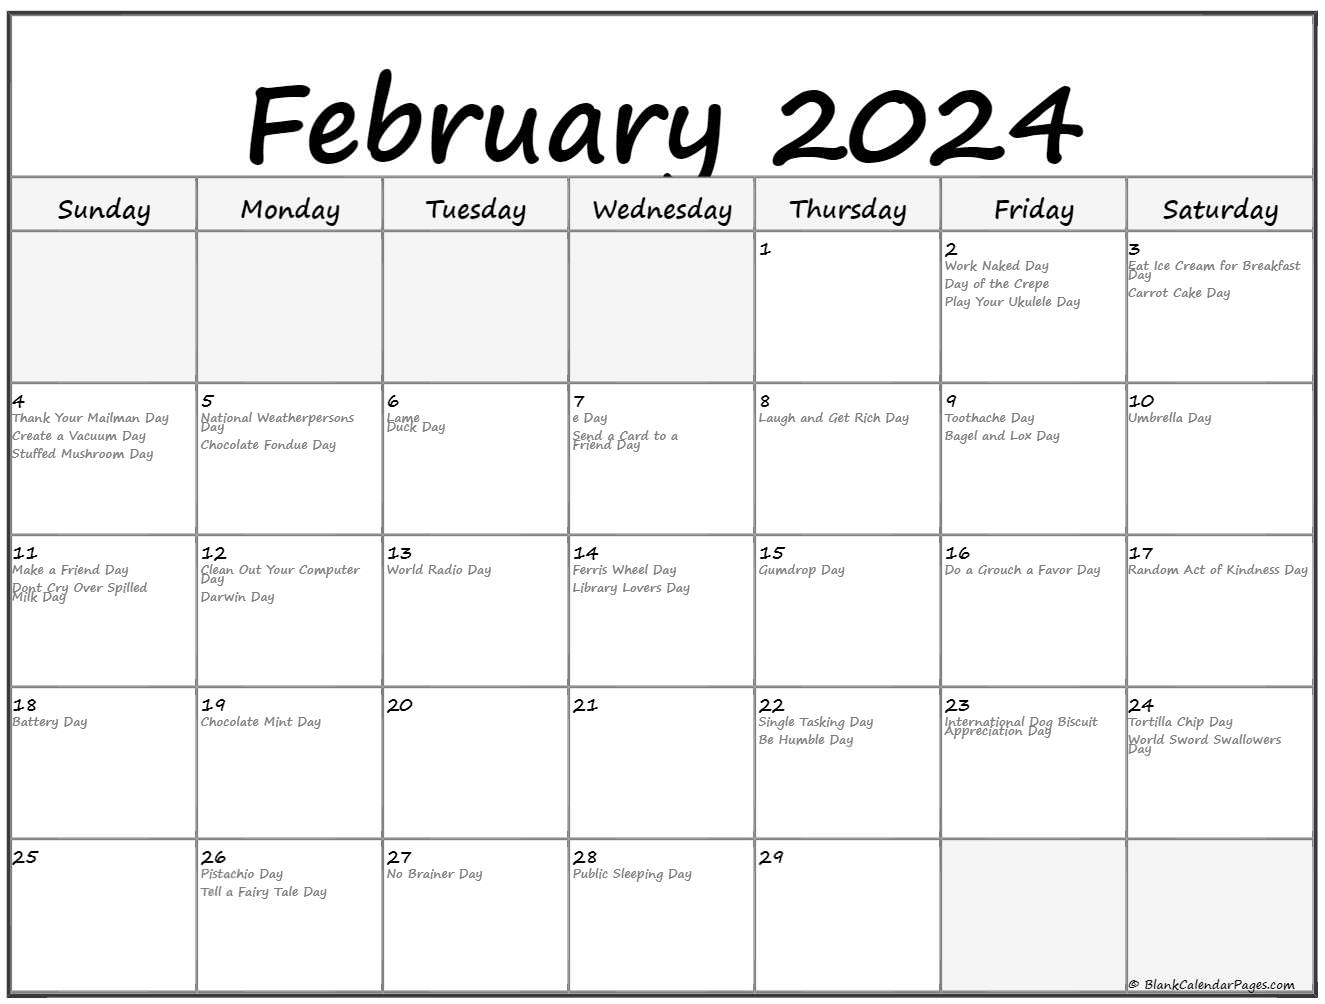 February Recognition Days 2024 Latest Top The Best Famous February